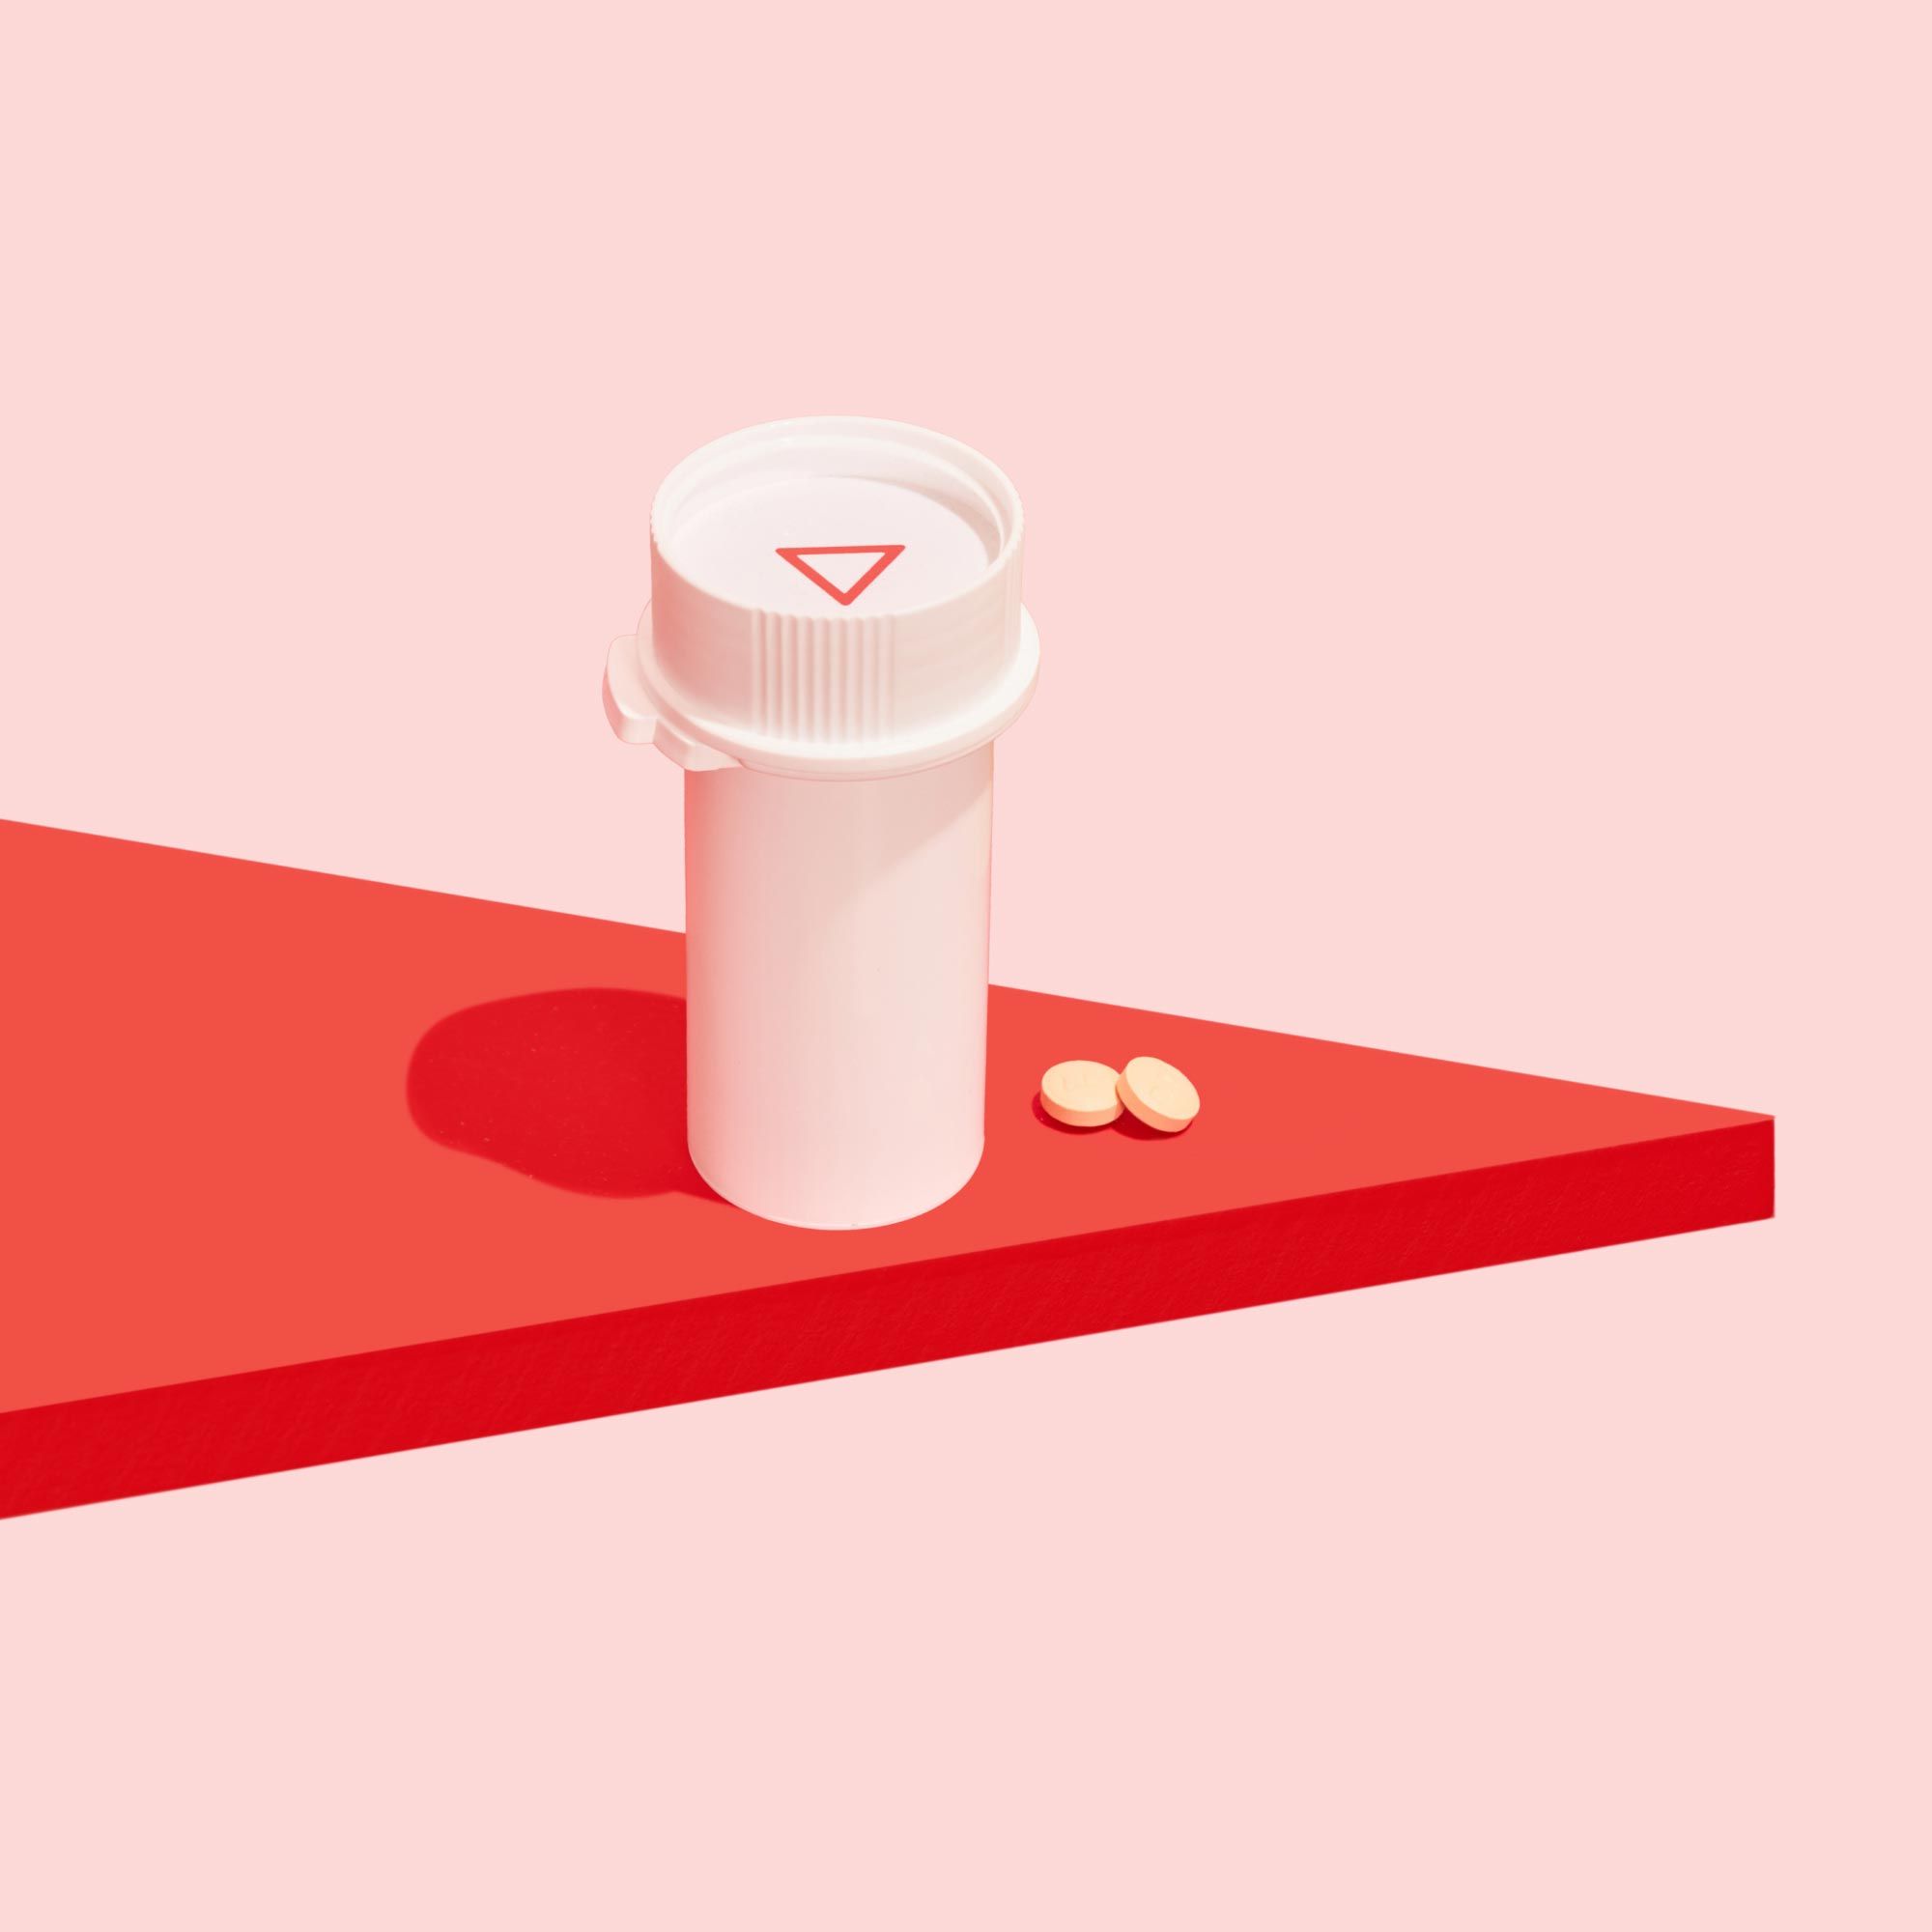 Two DoxyPEP pills and a pill vial on a red surface with a pink background